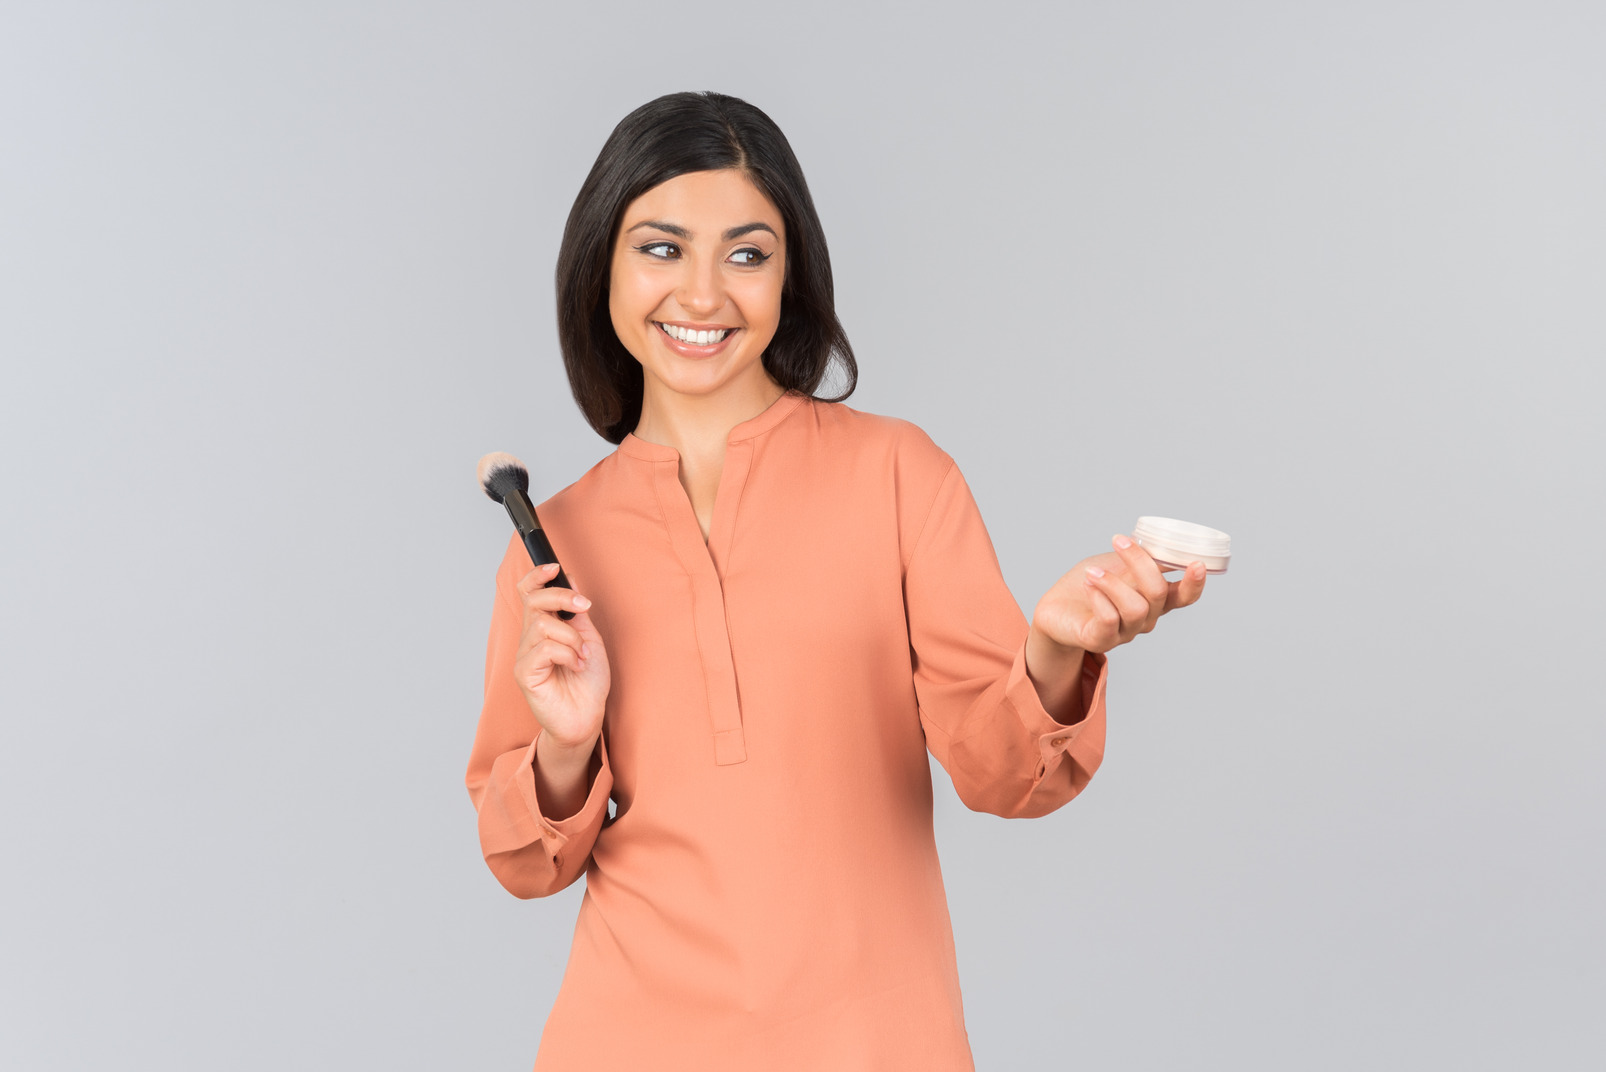 Indian woman holding face powder and powder brush